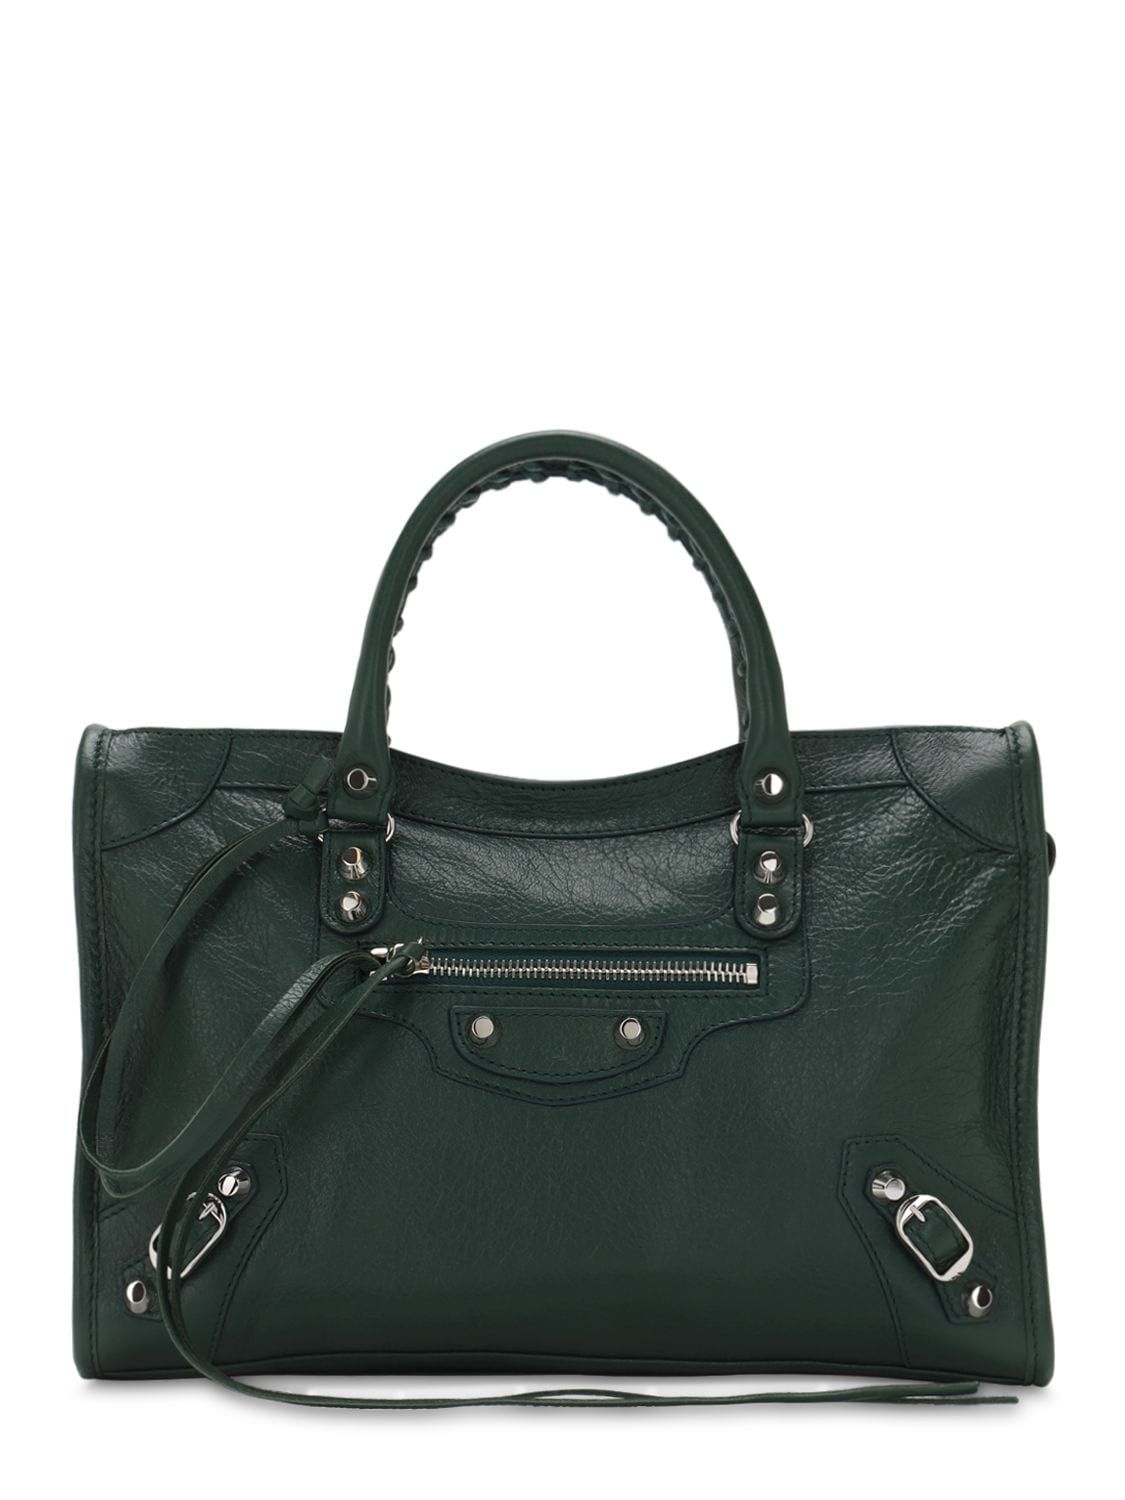 Balenciaga Sm Classic City Leather Top Handle Bag In Forest Green